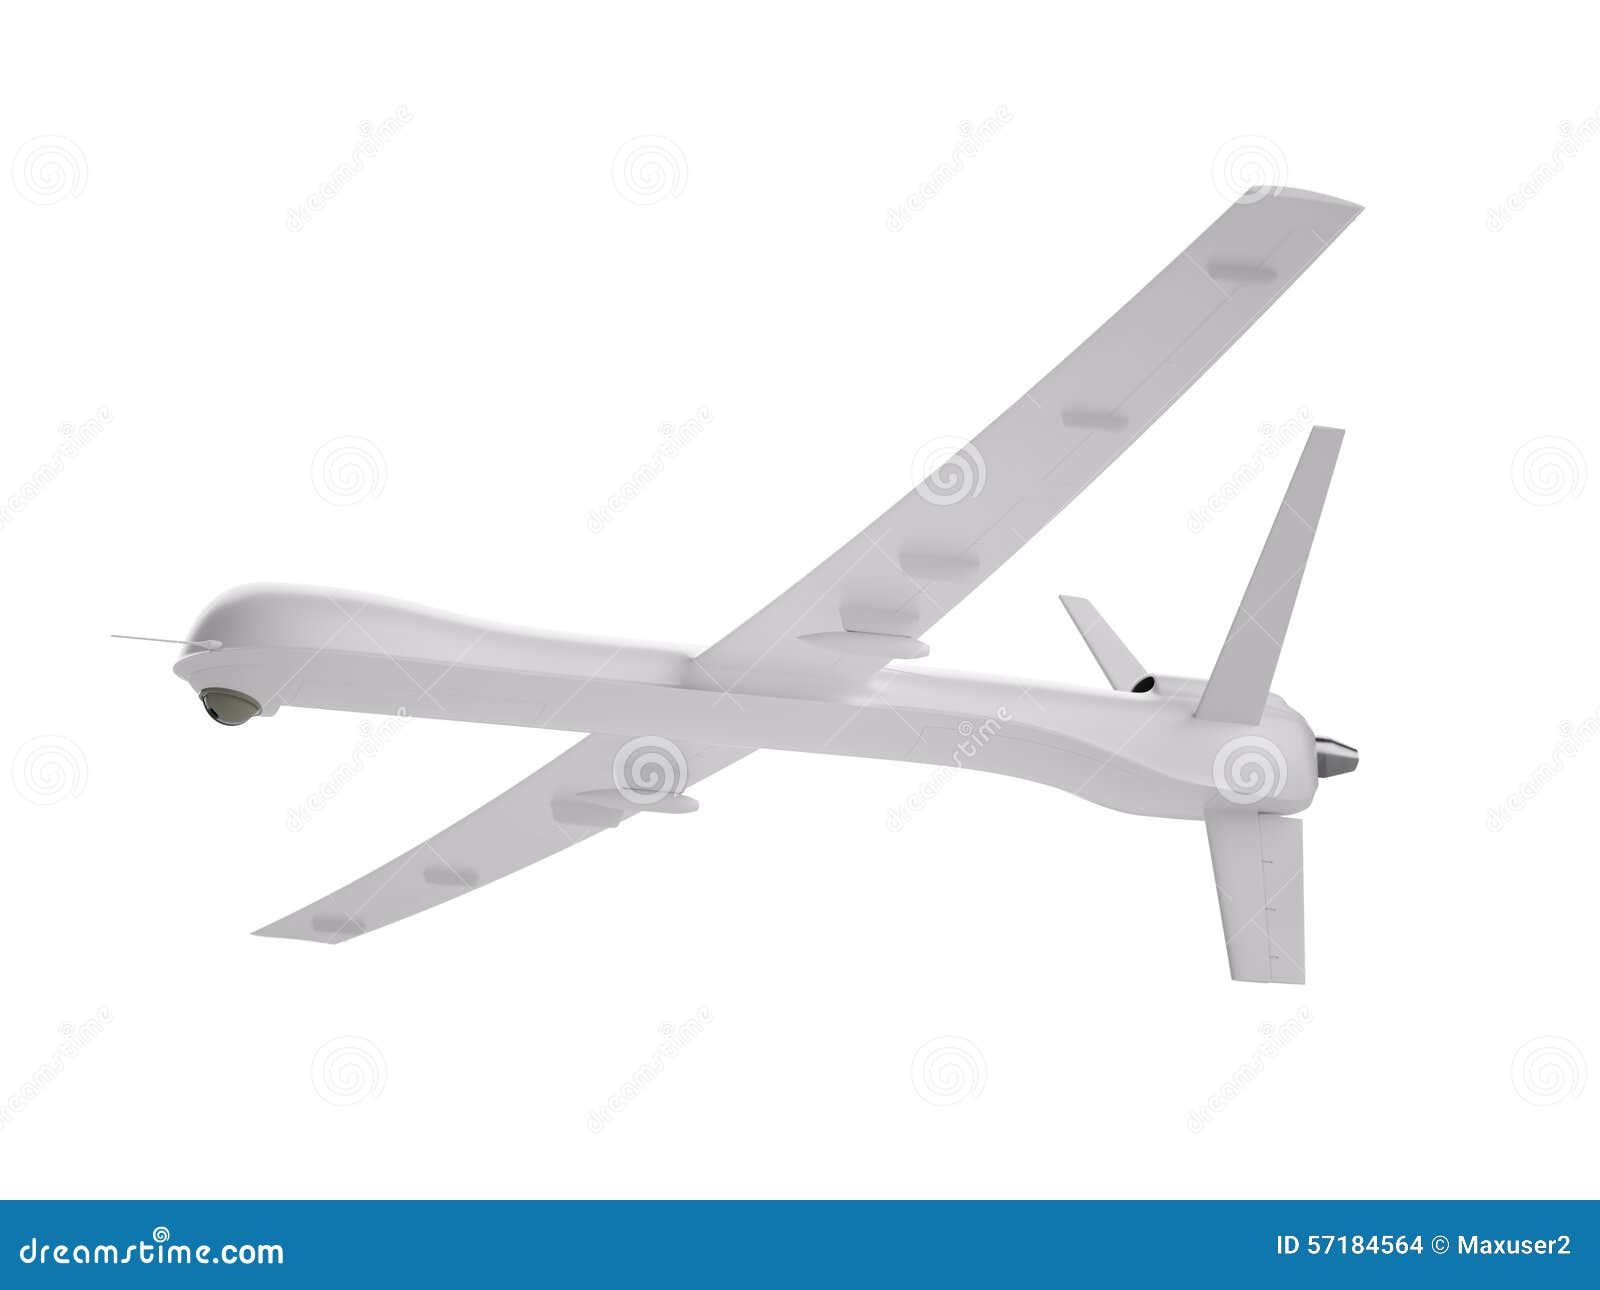 unmanned aerial vehicle  on white